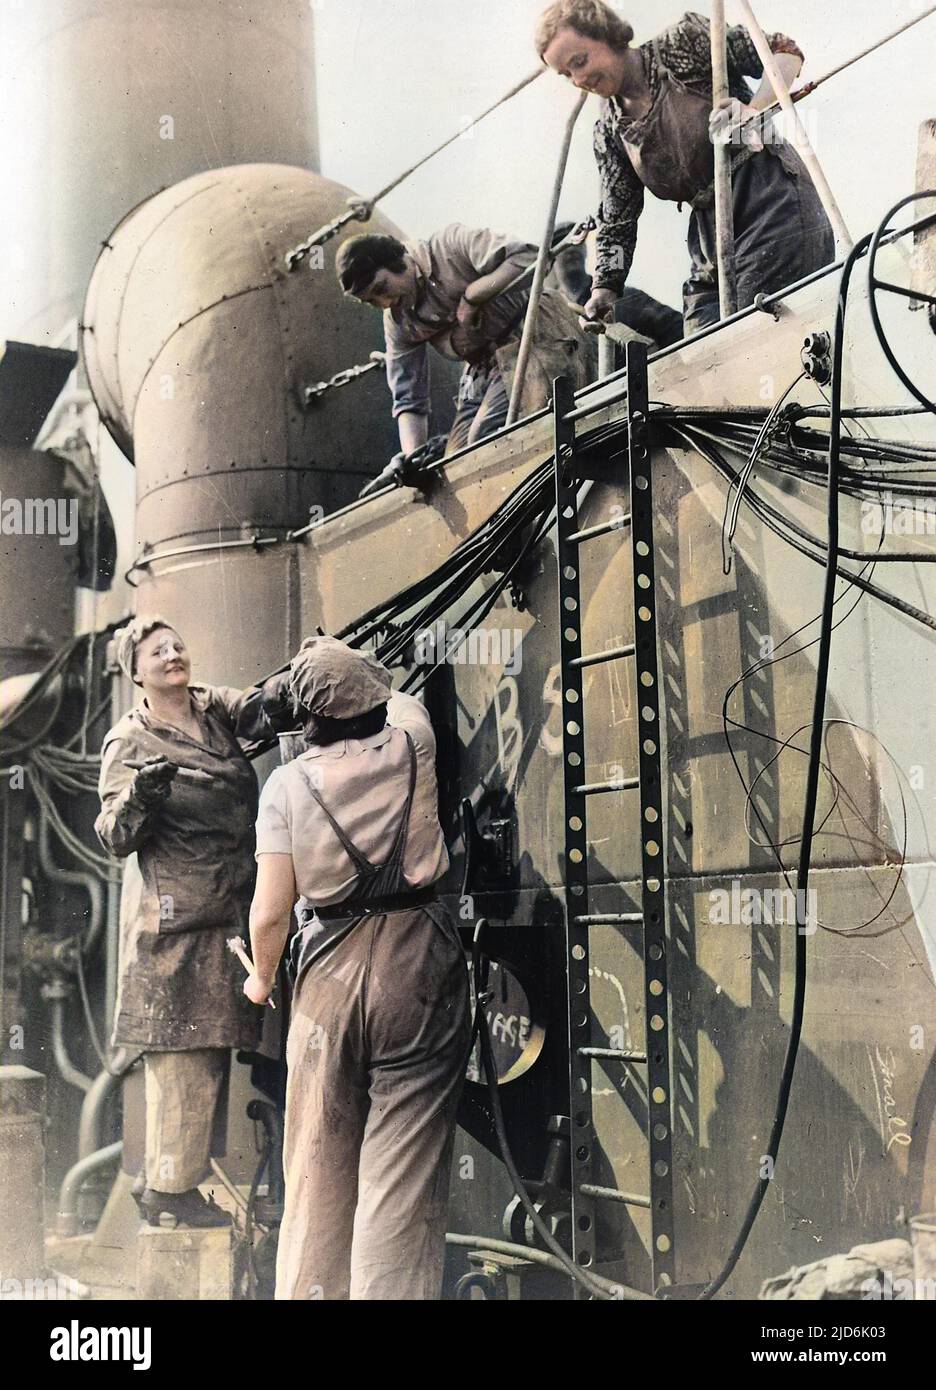 The original image caption states: 'The Women's place in the British scheme of things. The place of wmen in wartime England is no longer the home. Each day women begin to take over more and more of the tasks formerly done by the men who are now taking part in Britain's war effort. From painting ships (pictured) to keeping the hedges of Old England neat is all in a days work as the ladies of England 'see it through'. These women whose husbands are serving with the forces, tackle their job of painting a ship in a British port with plenty of vim and vigour, and they do a REAL JOB of painting!' Co Stock Photo